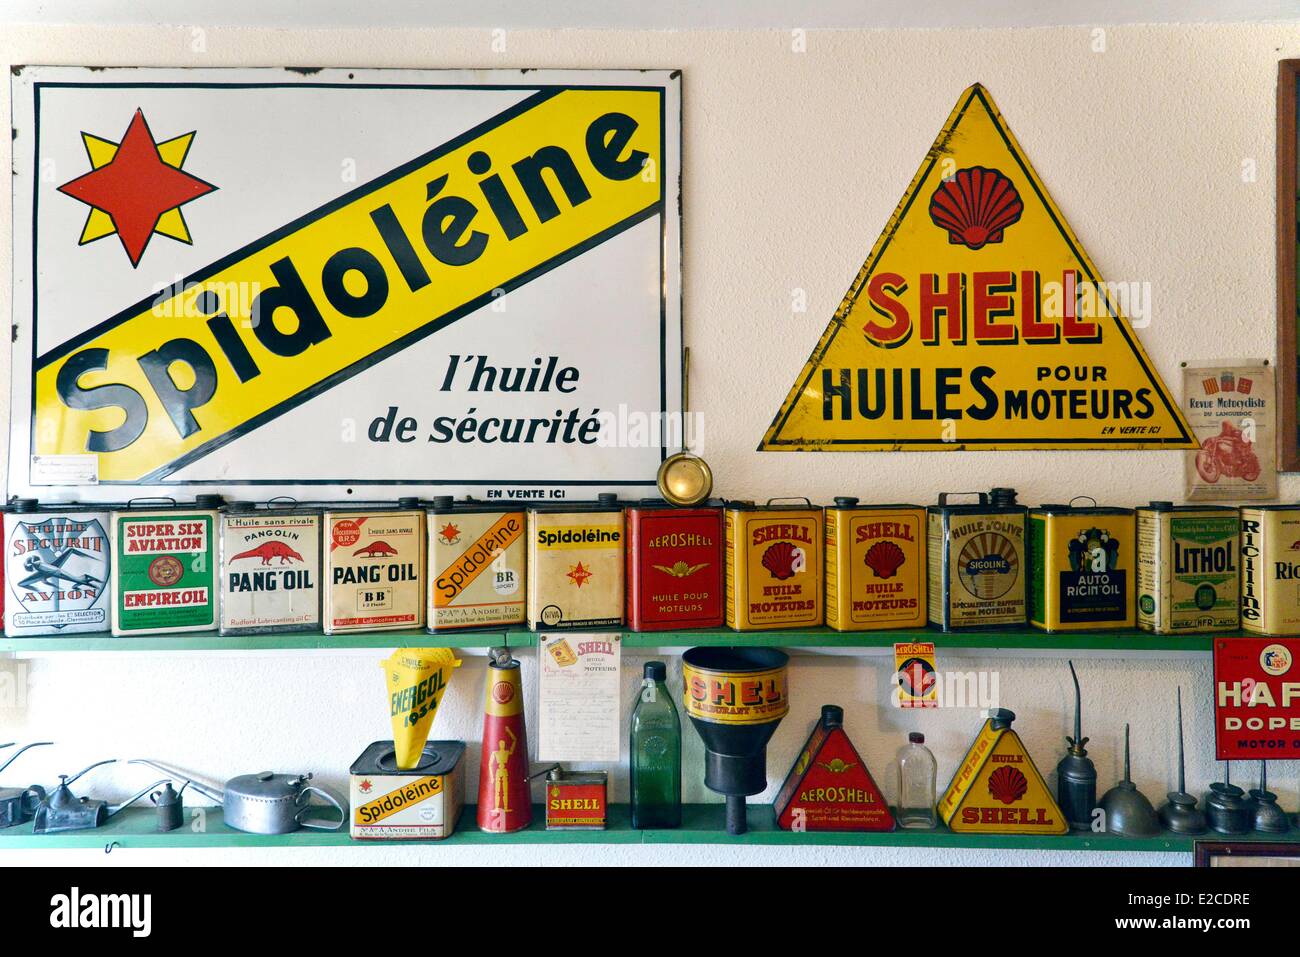 France, Herault, Boujan sur Libron, Chapy museum, collection of tins and oil cans in front of advertisements on enamel plates Stock Photo